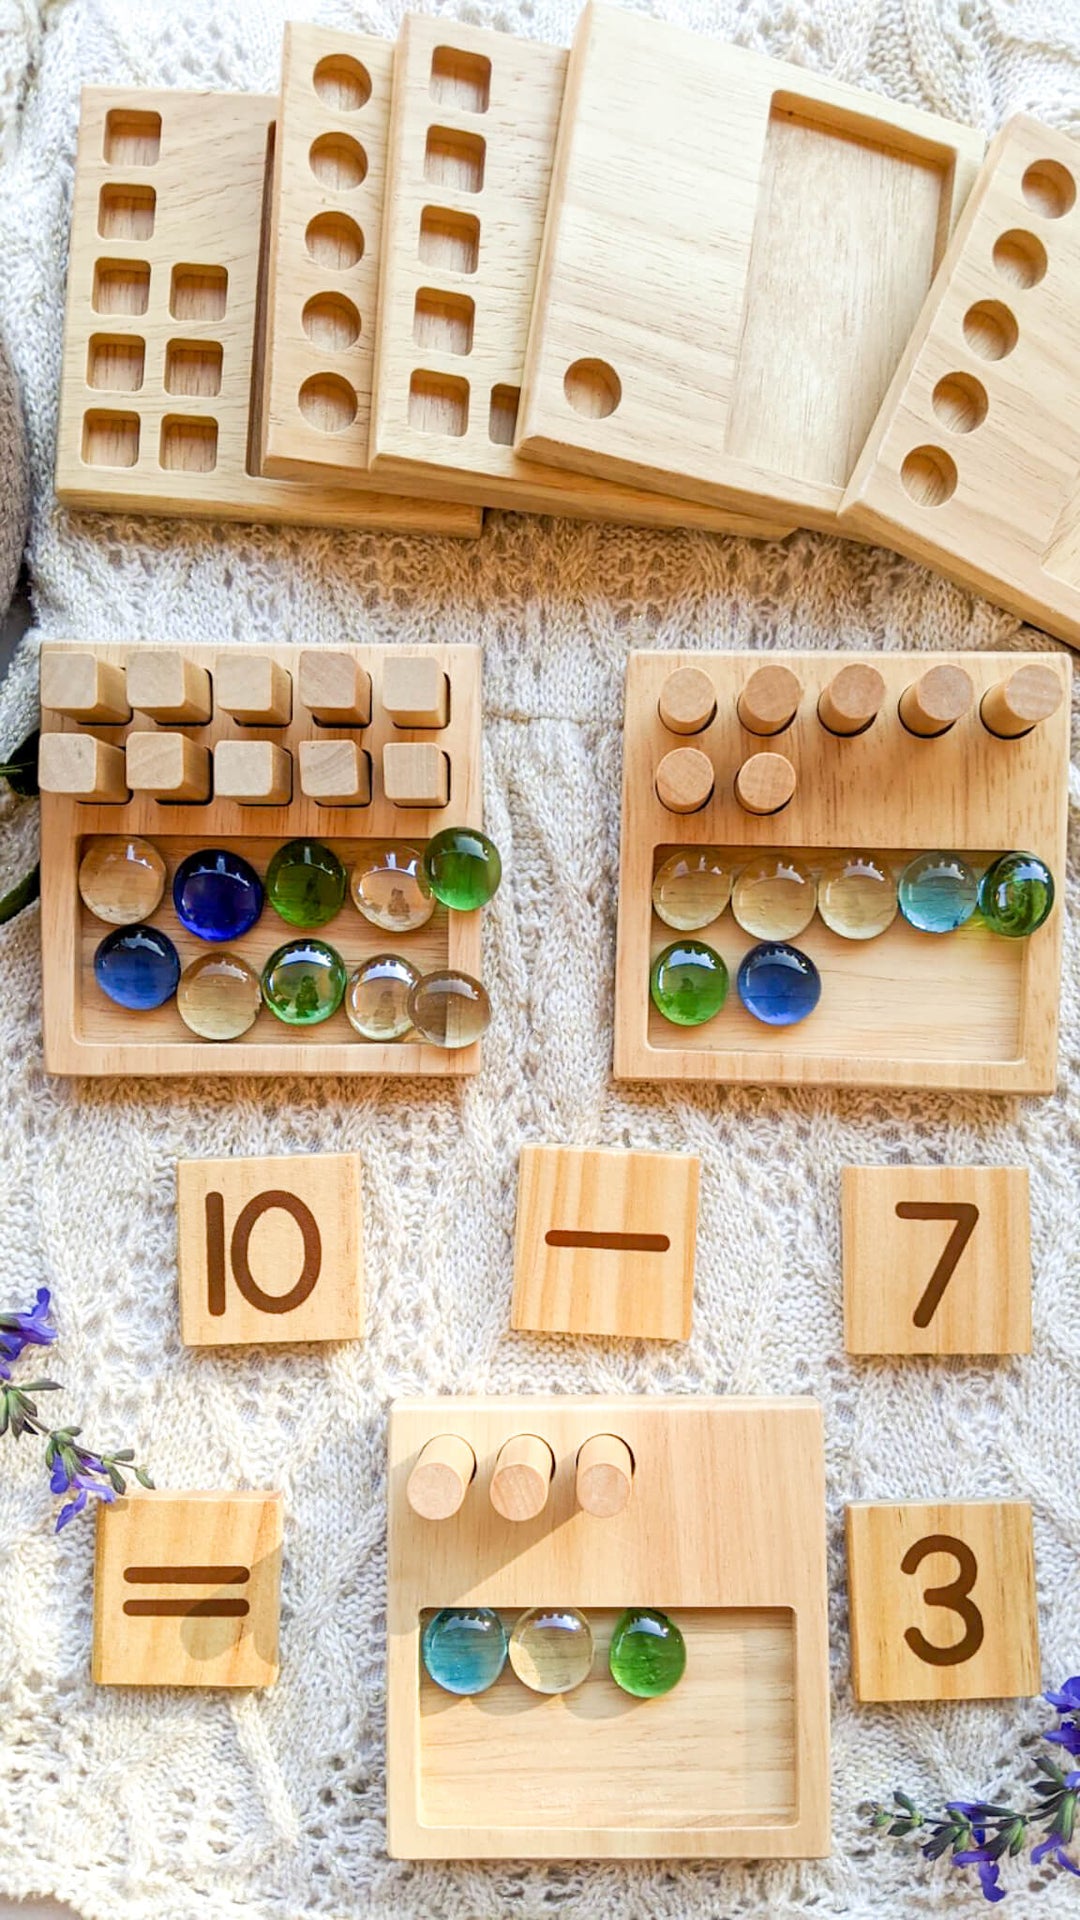 Wooden Counting Number Peg Board: Math Manipulatives Materials Montessori  Toys for 3 4 5 Year Old Kids, Preschool Early Learning Educational Math Toy